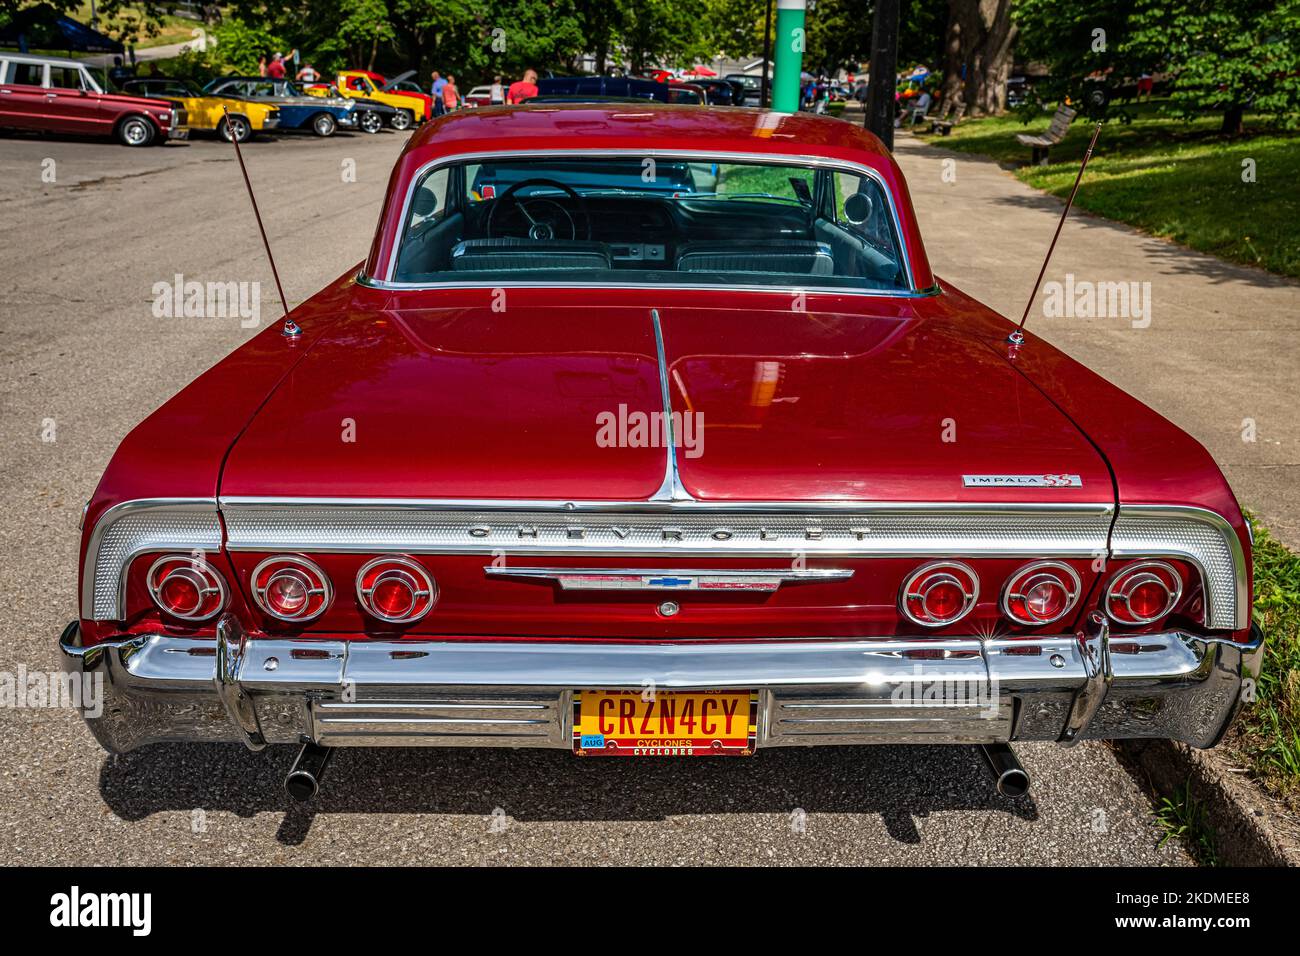 Des Moines, IA - July 02, 2022: High perspective rear view of a 1964 Chevrolet Impala SS Hardtop Coupe at a local car show. Stock Photo